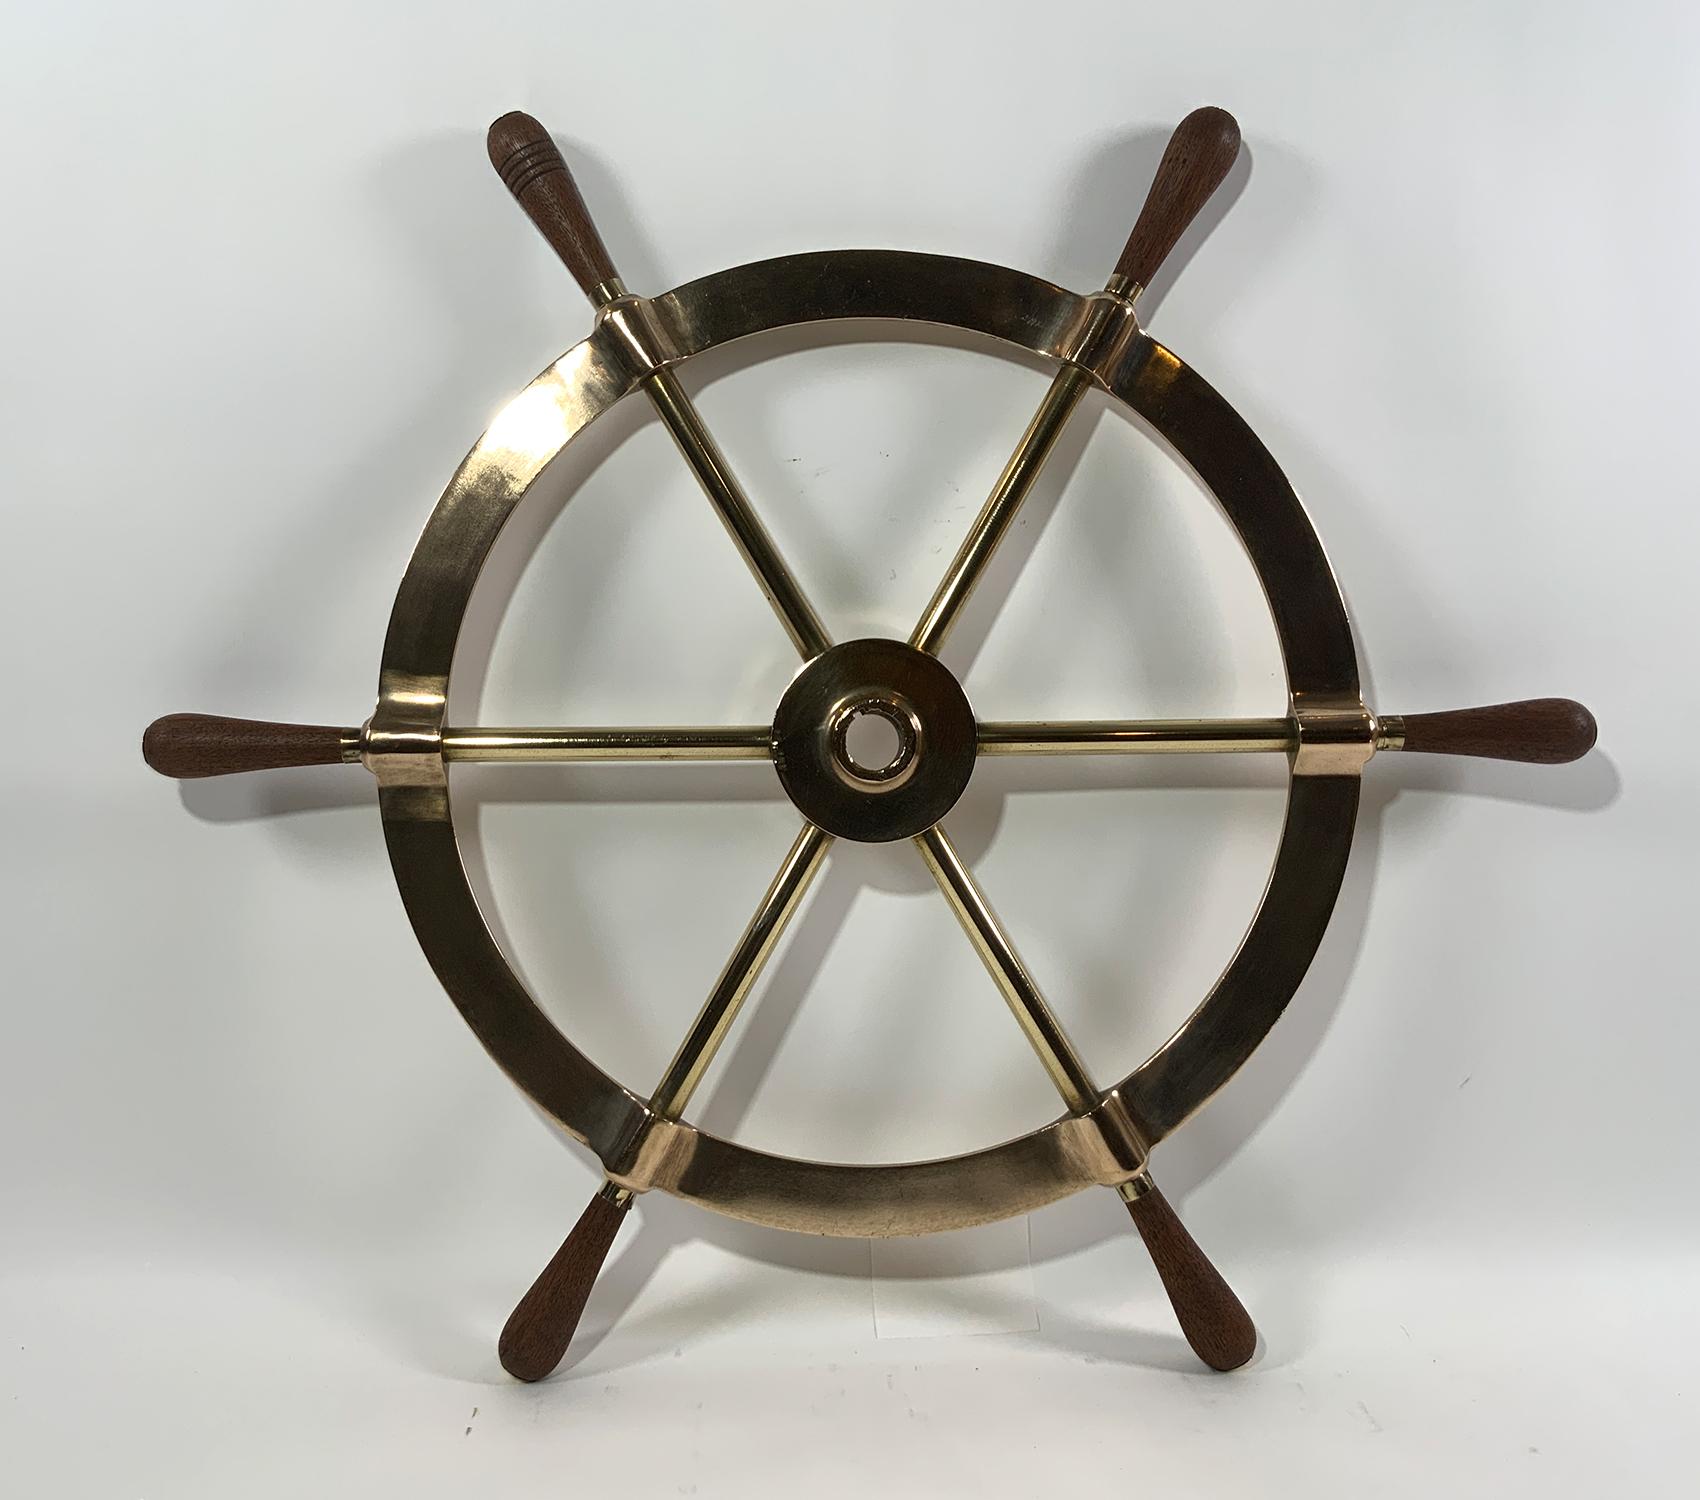 Exceptional yacht wheel, very heavy. With wood handles. Center hub has a keyhole. This is as good as they come.

Weight: 23 LBS
Overall Dimensions: 31